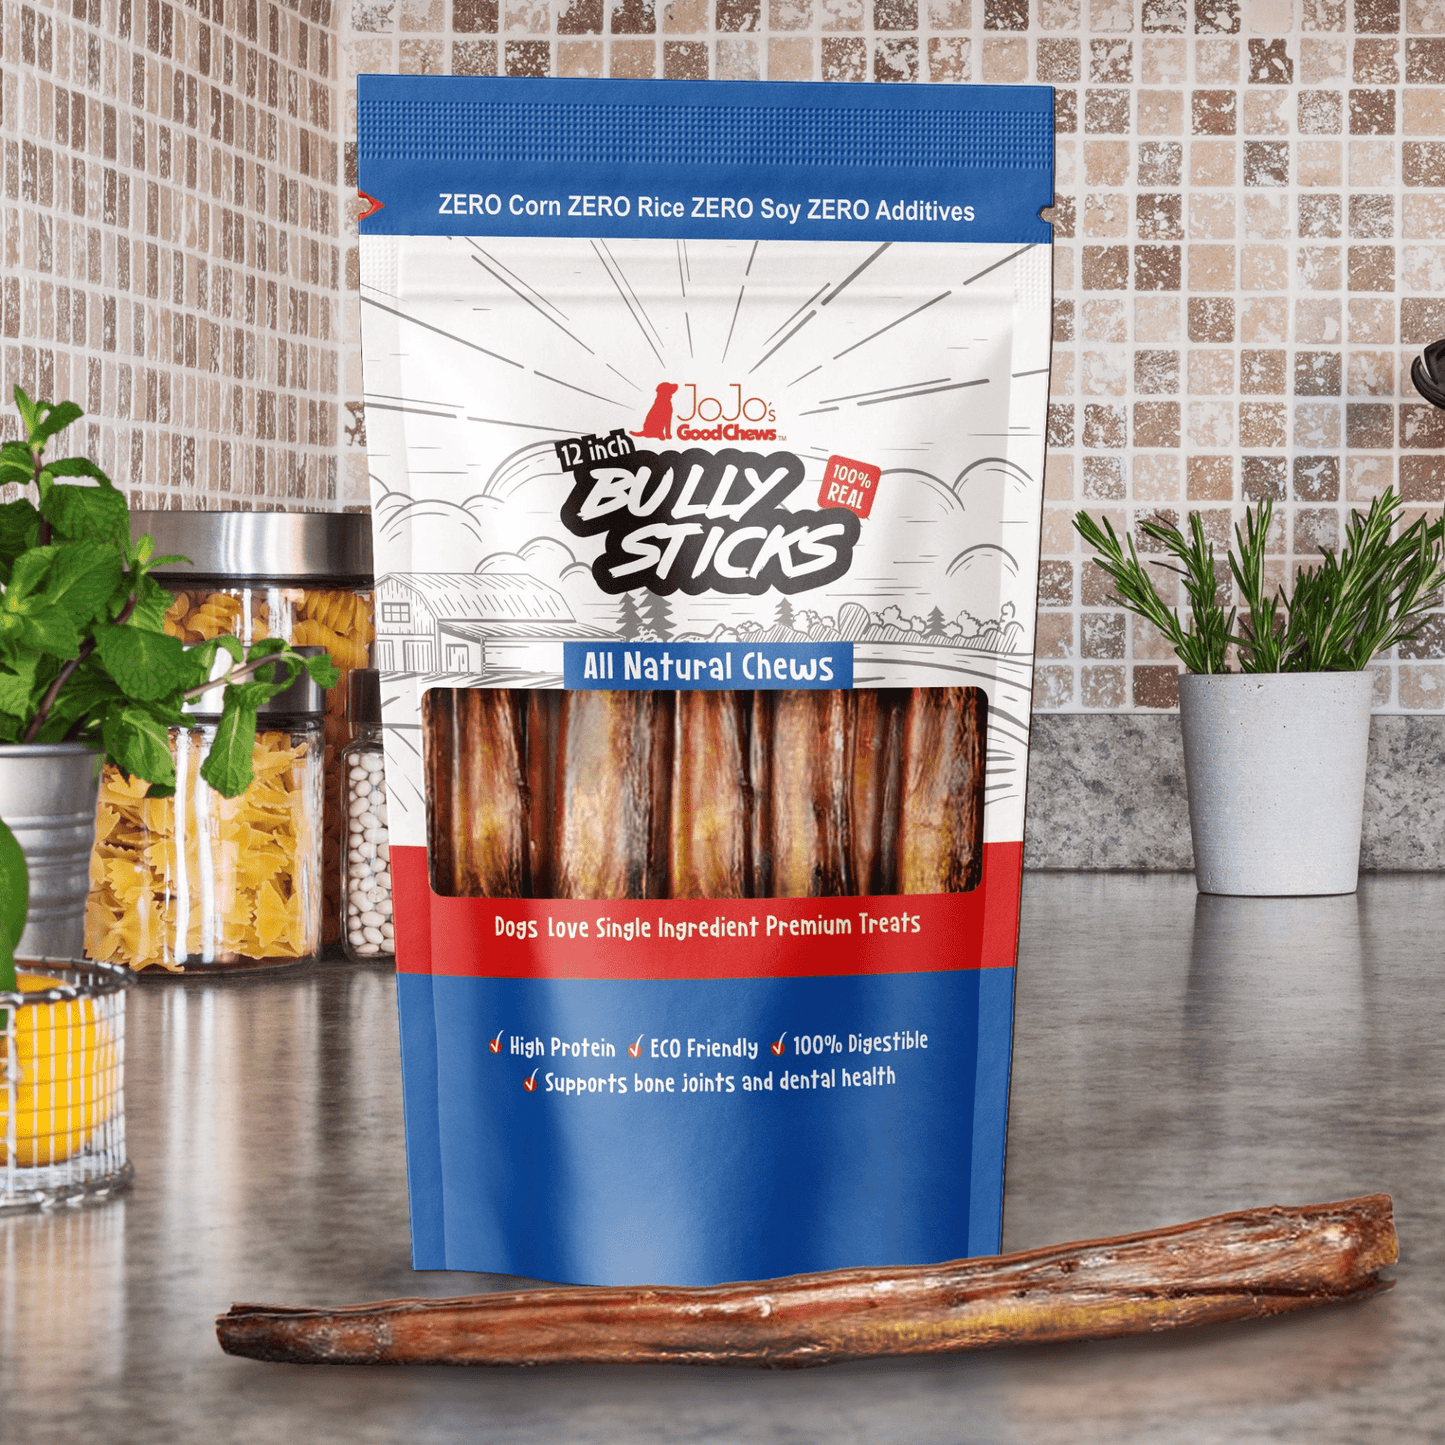 Dog and Pet Stuff Default All-Natural Beef Bully Stick Dog Treats - 12" Jumbo (2-Pack)